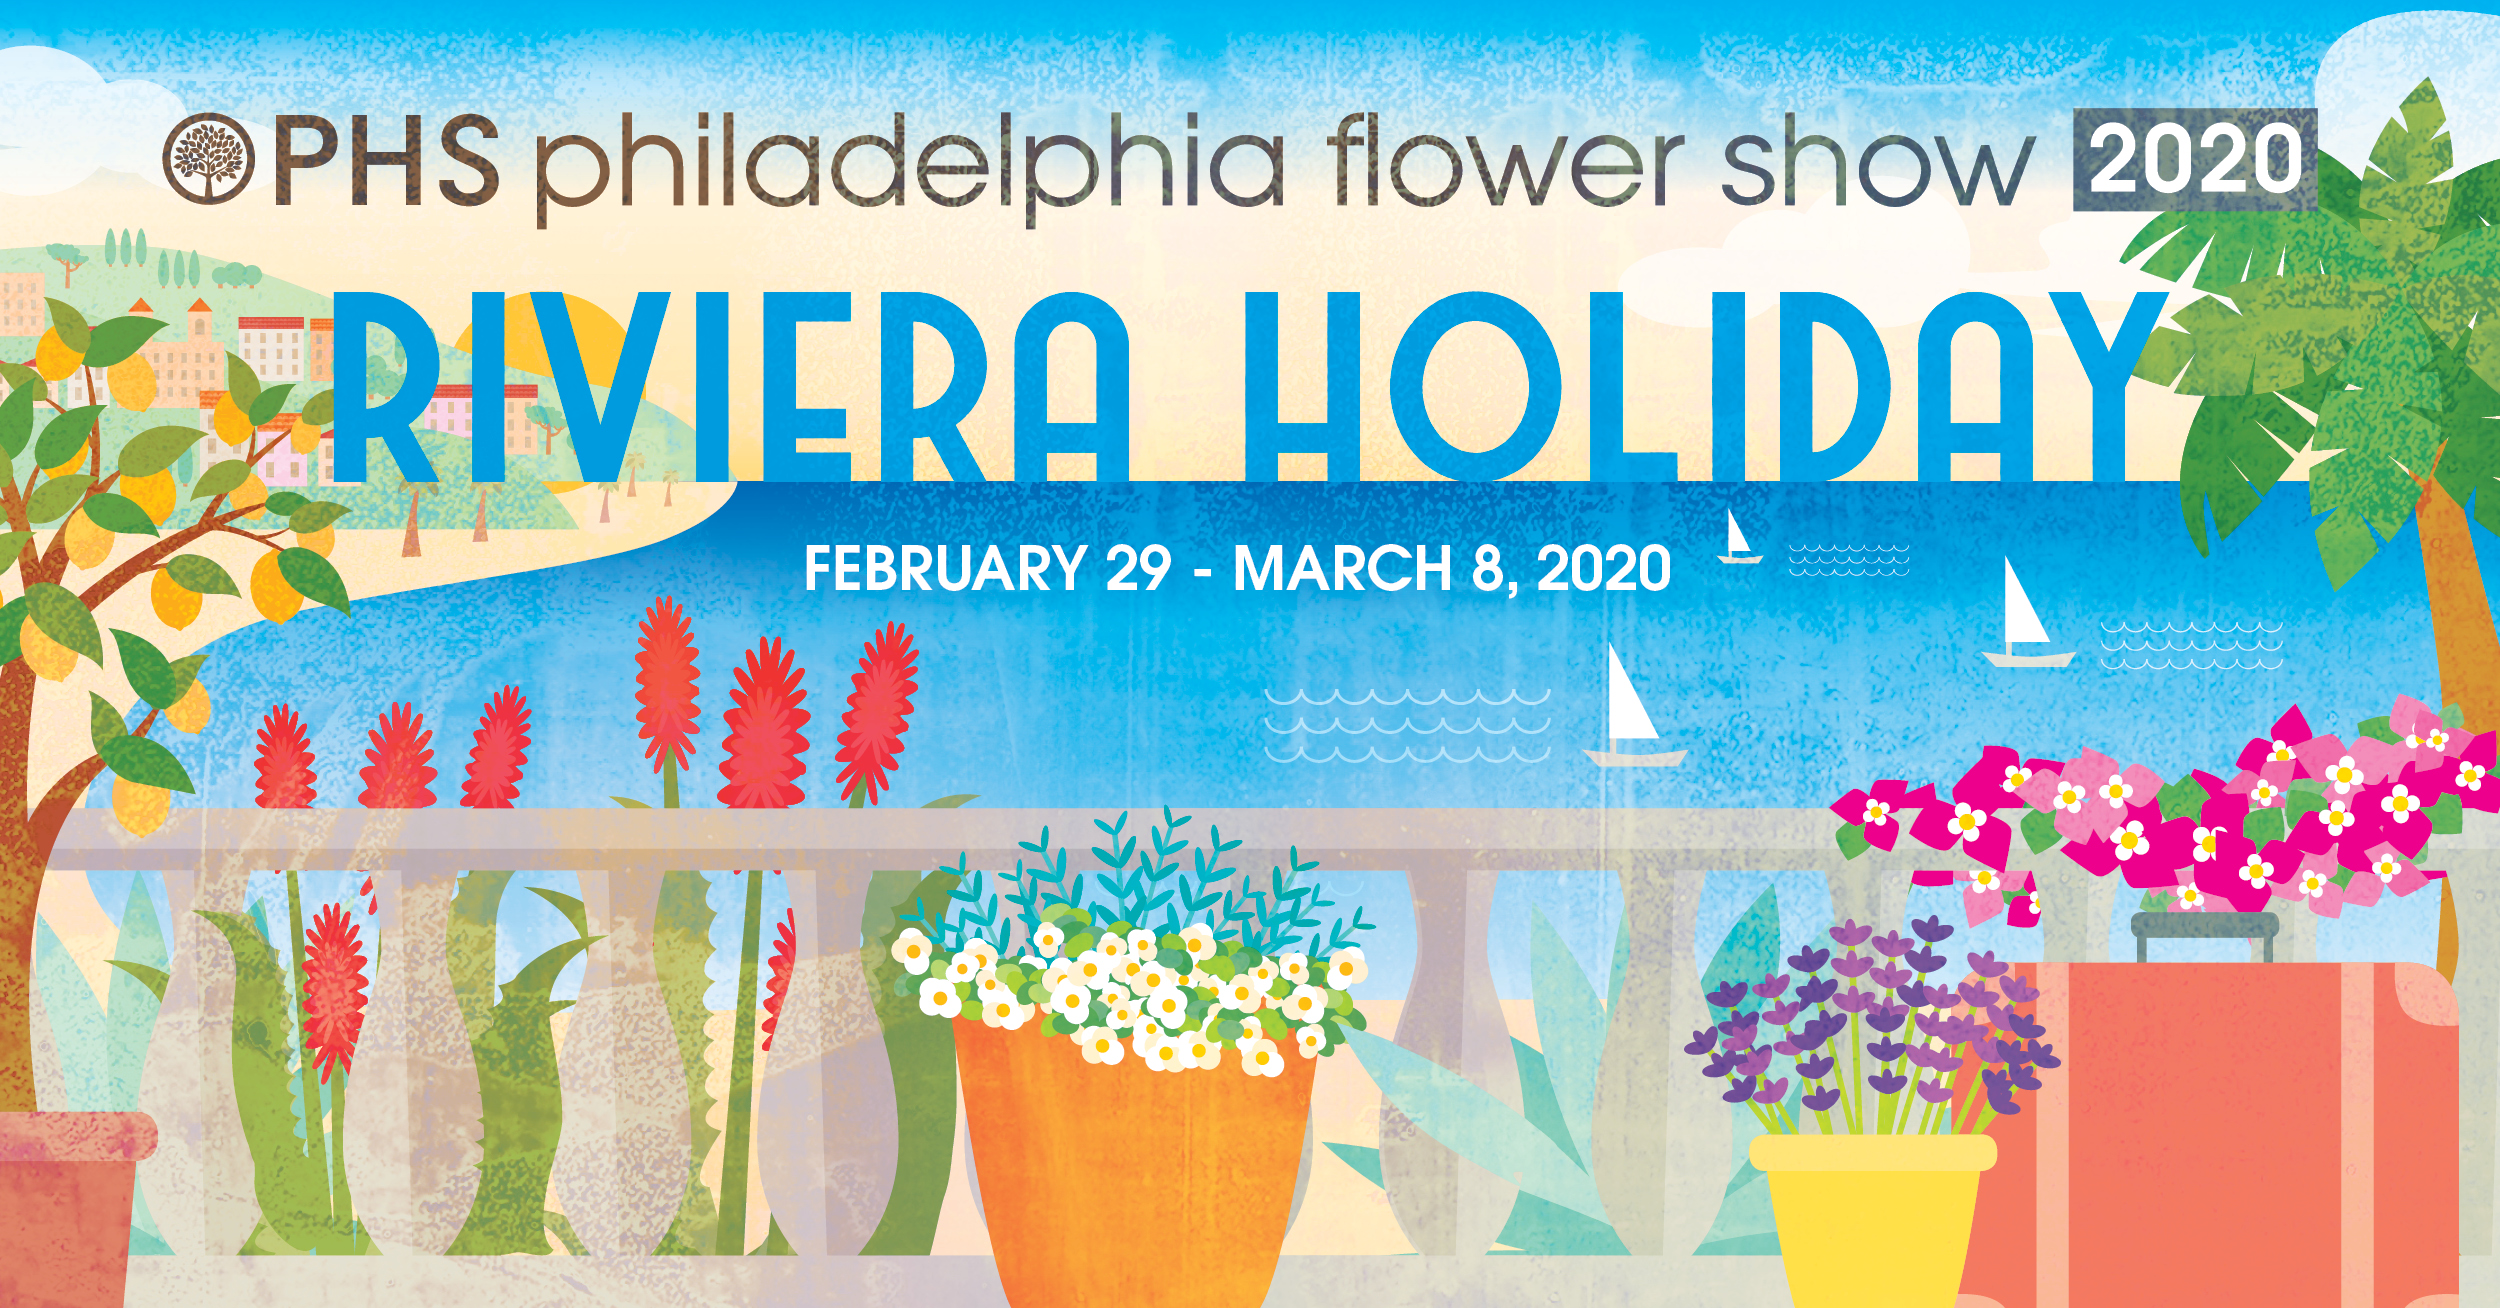 Setting Up the 2020 PHS Flower Show “Riviera Holiday”